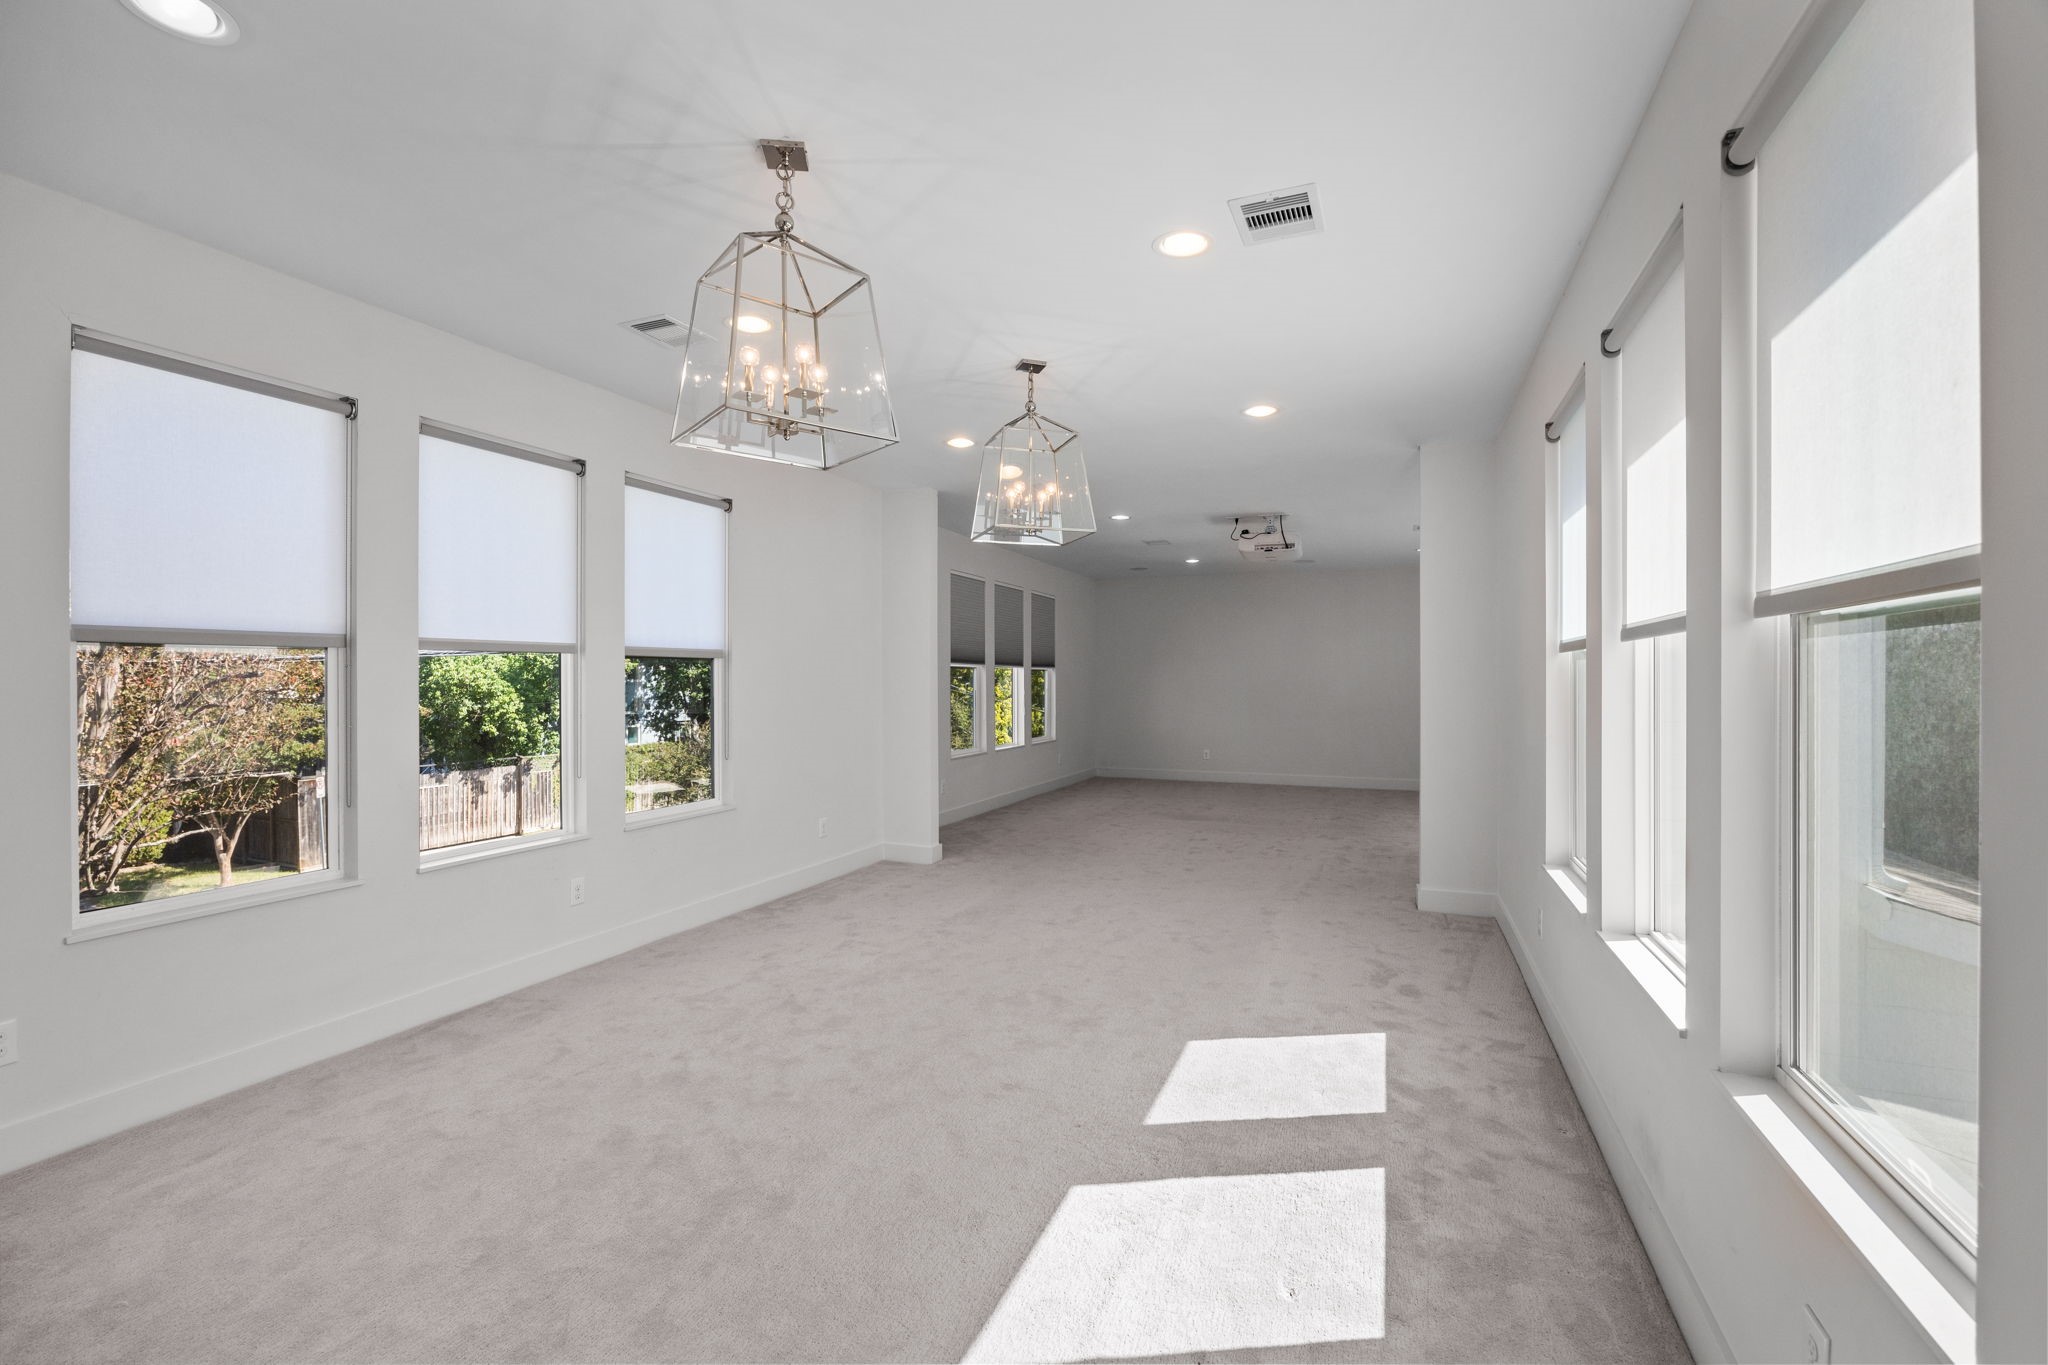 ENDLESS POSSIBILITIES! This incredible bonus space can be multi-purpose and divided into two rooms if needed.